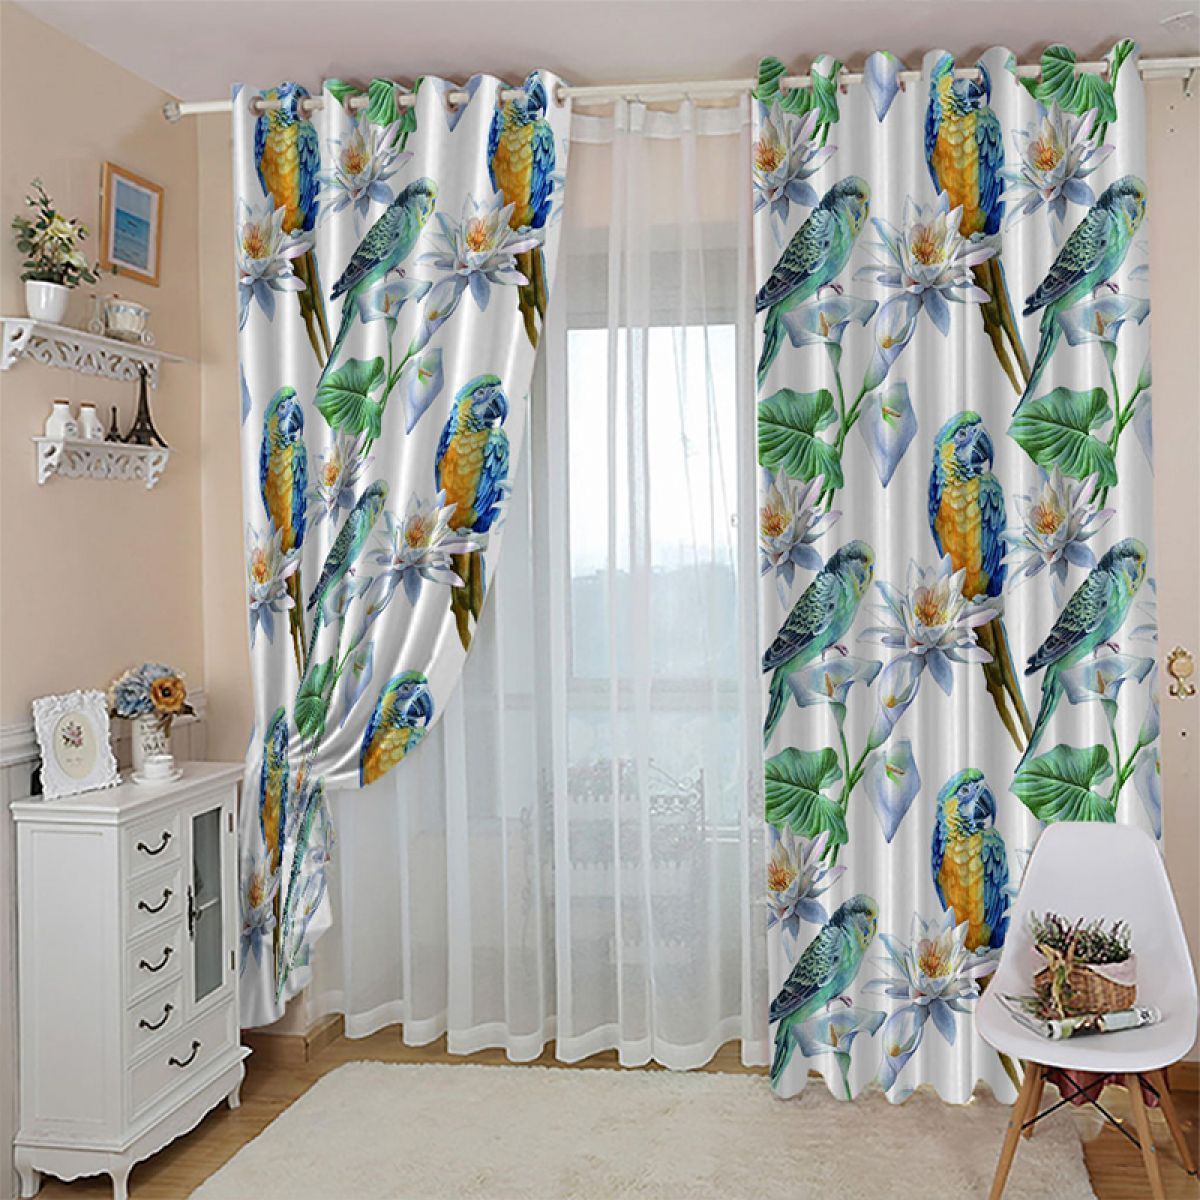 parrots all over printed window curtain home decor 1526